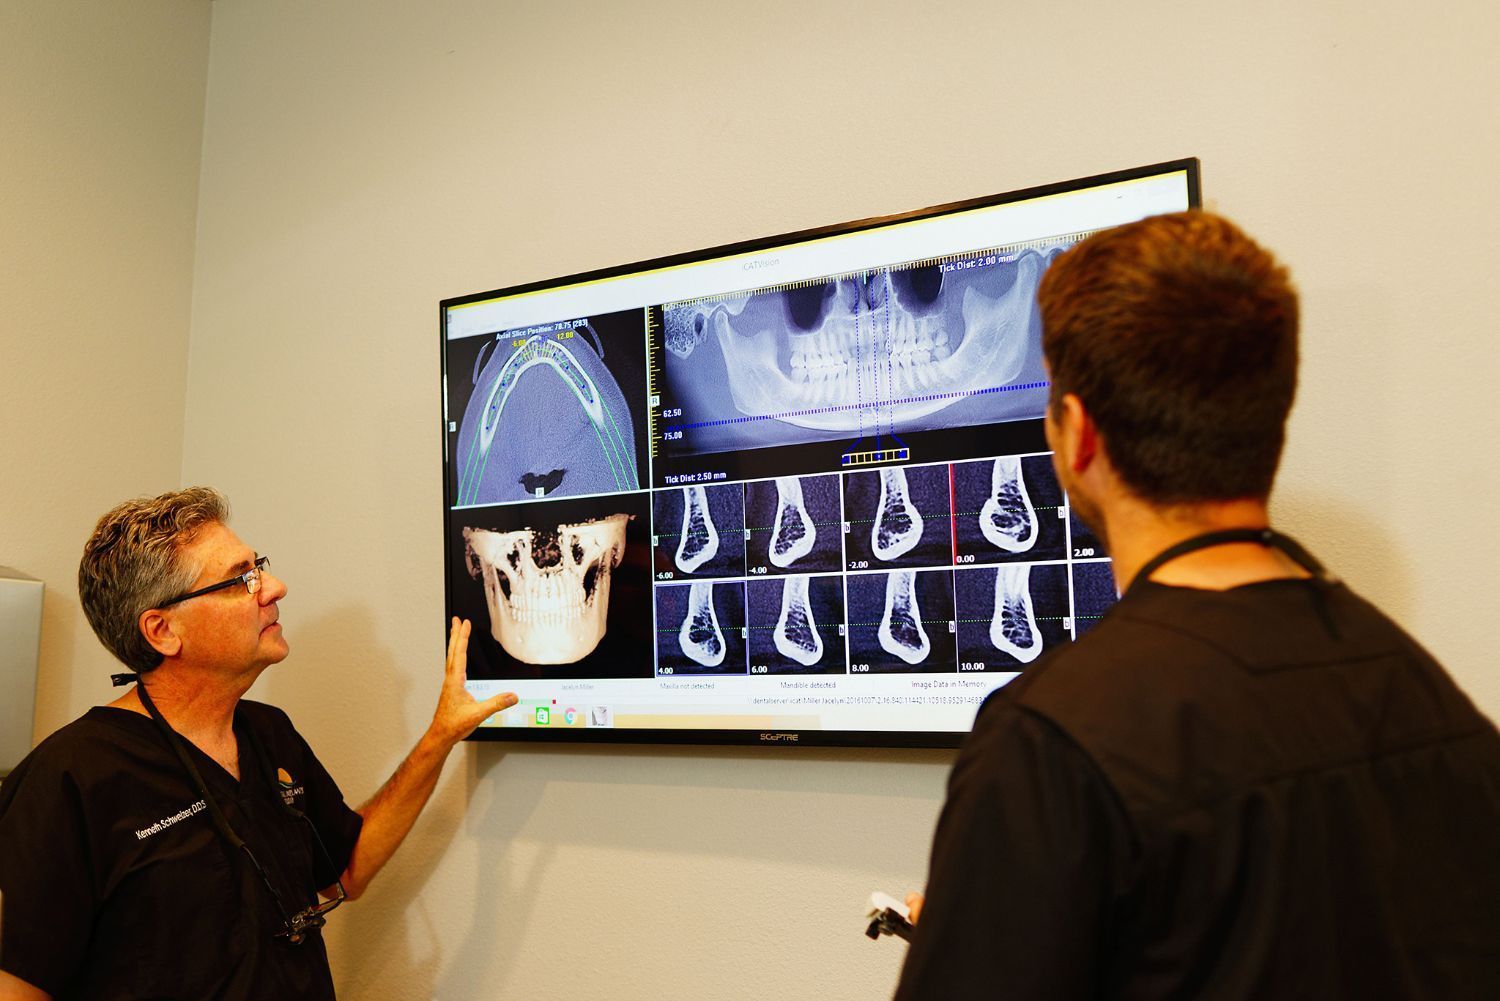 Two men are looking at an x-ray of a skull on a television screen.